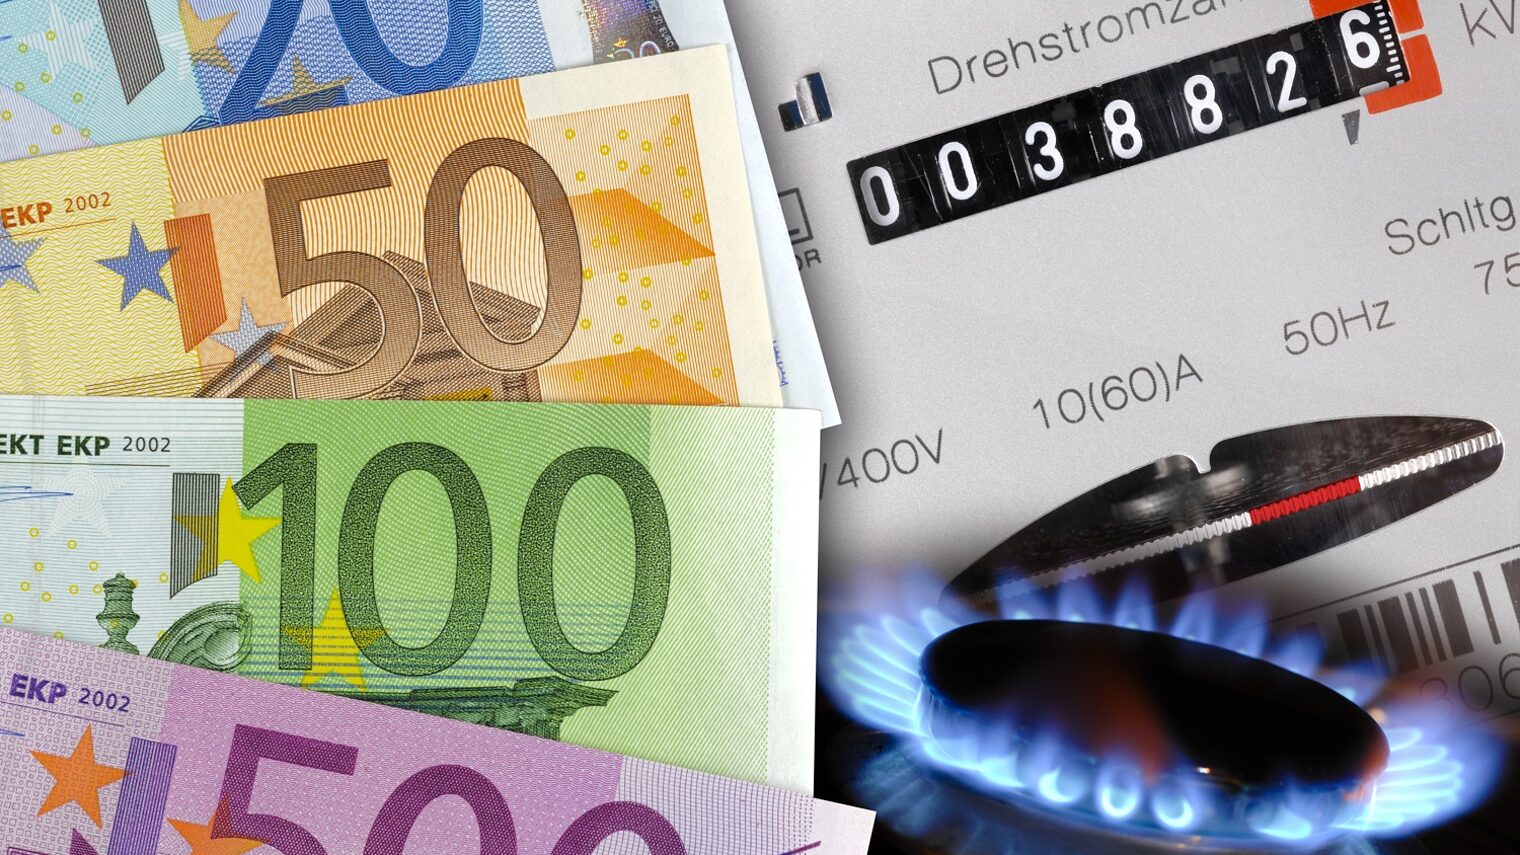 electric meter and Euro banknotes as symbol for high energy costs